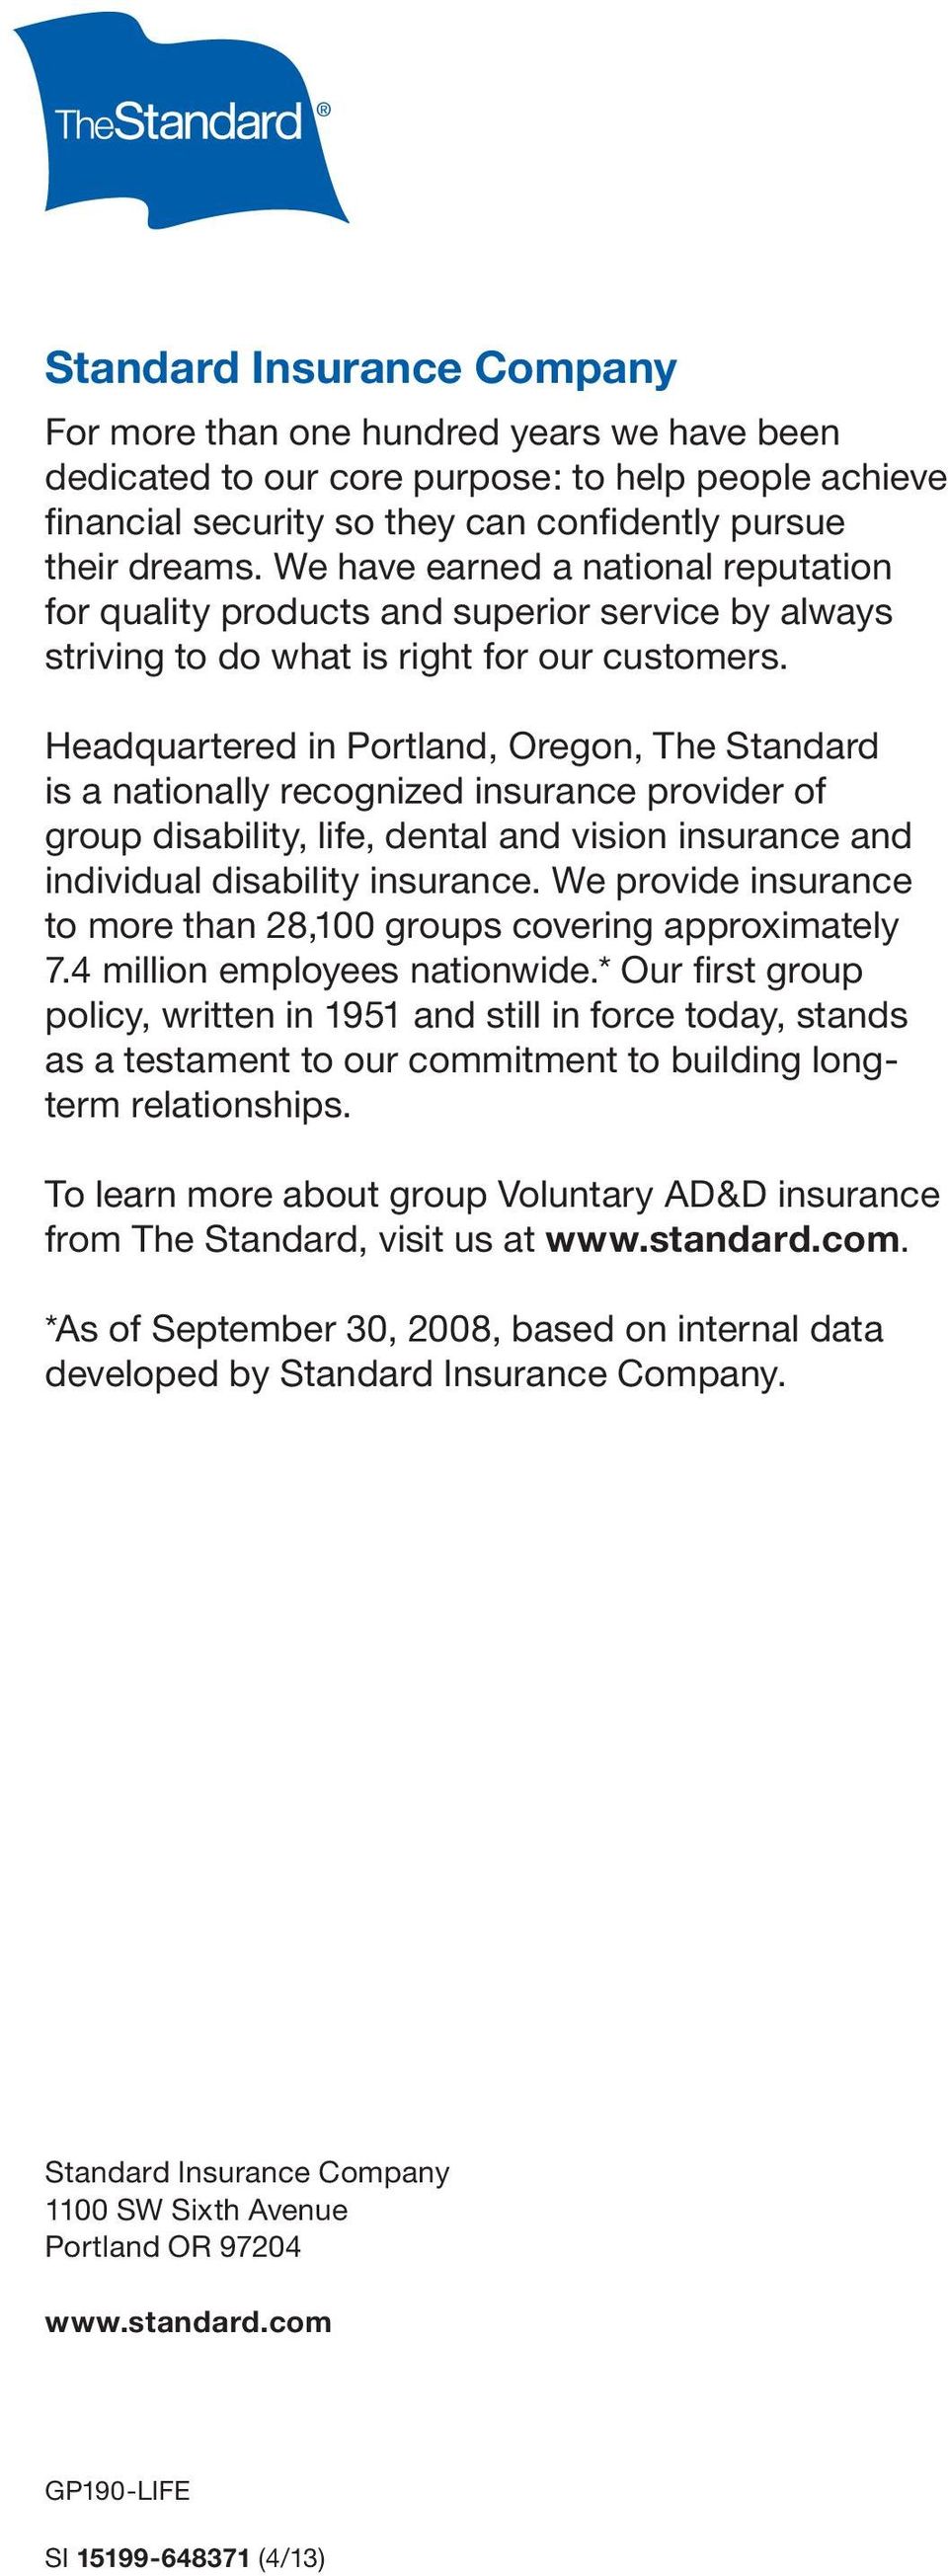 Headquartered in Portland, Oregon, The Standard is a nationally recognized insurance provider of group disability, life, dental and vision insurance and individual disability insurance.